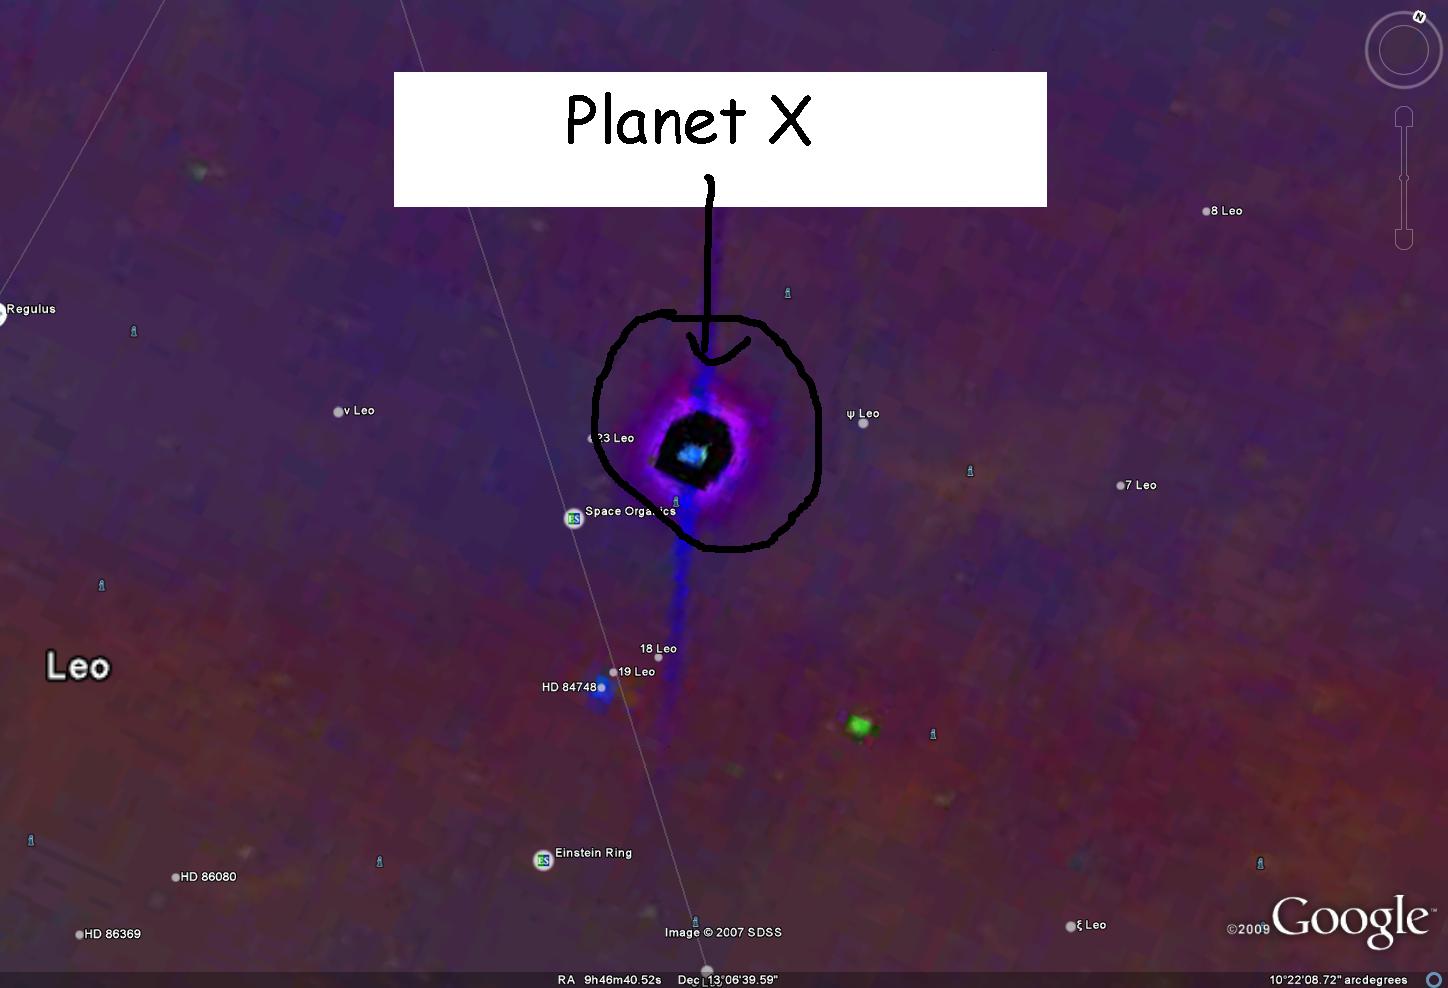 Check Boxes under IRAS Infared Sky and There it is again ntohing else like his on google earth...plz explane and exploit content you have my permission